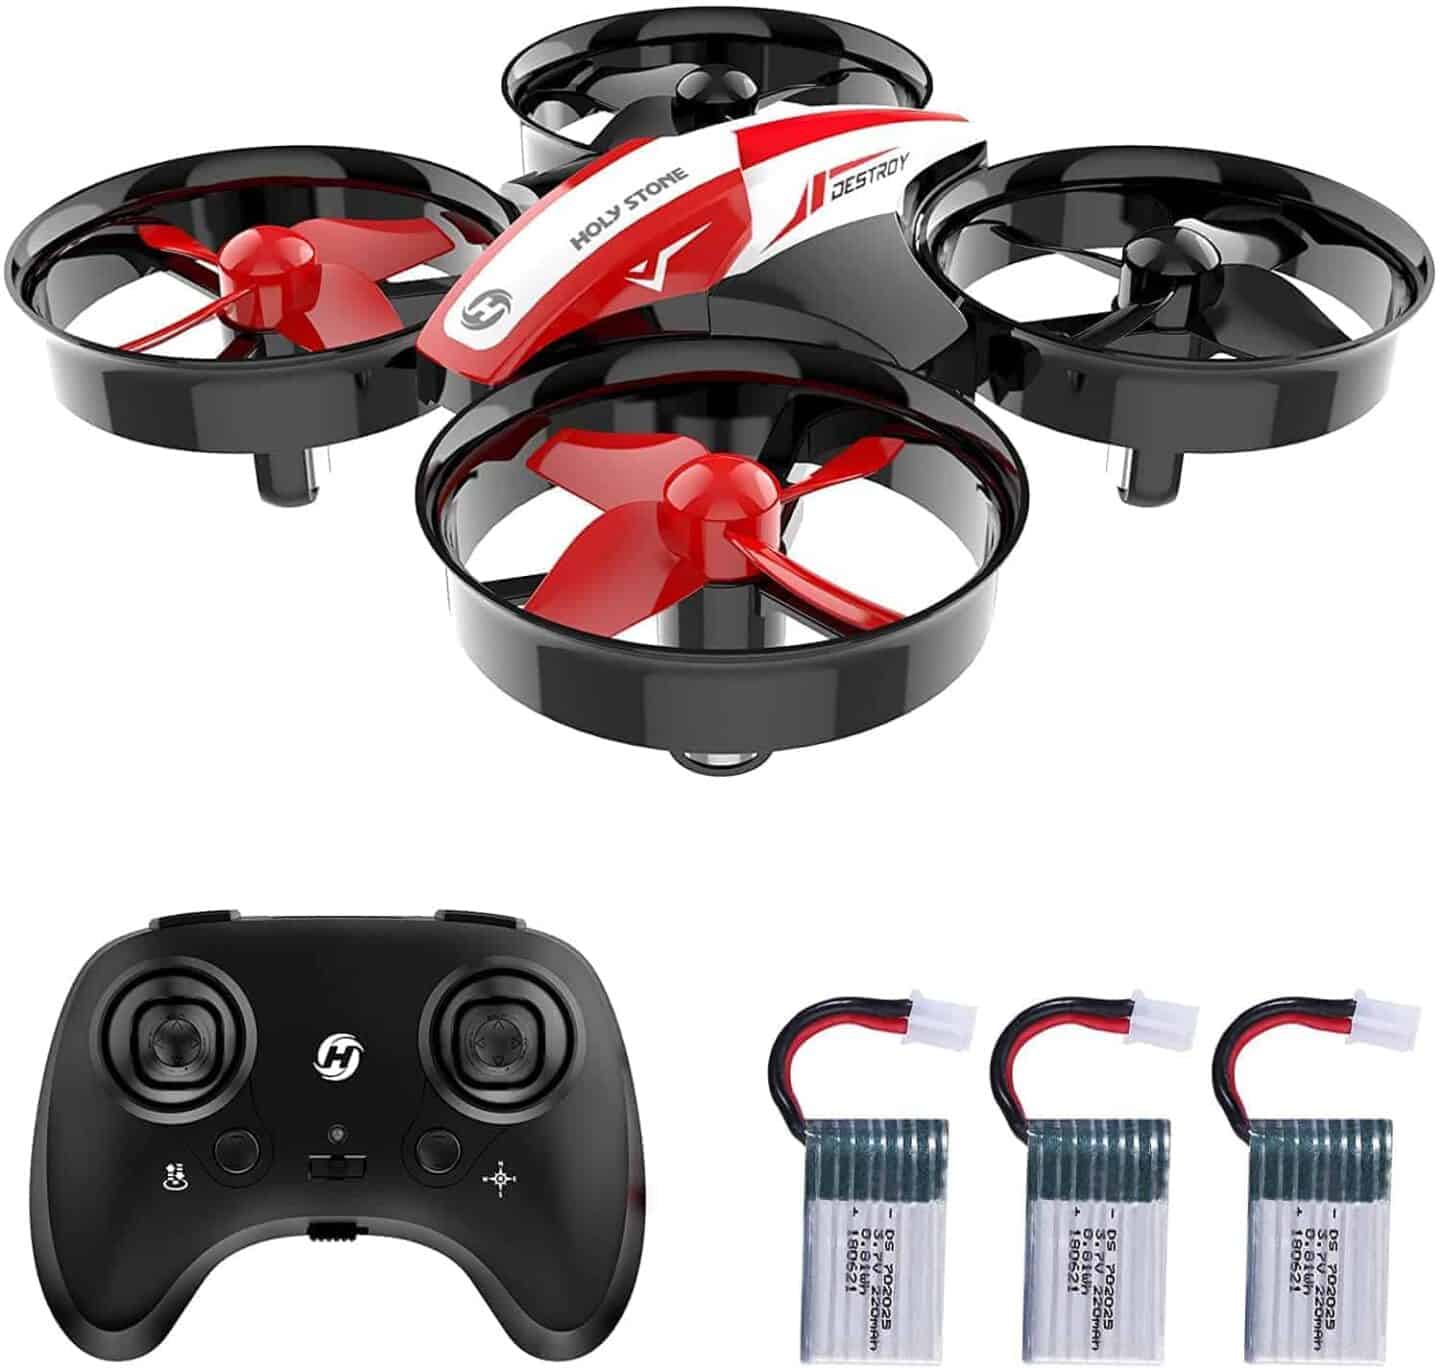 Mini-Drone-for-Kids-and-Beginners